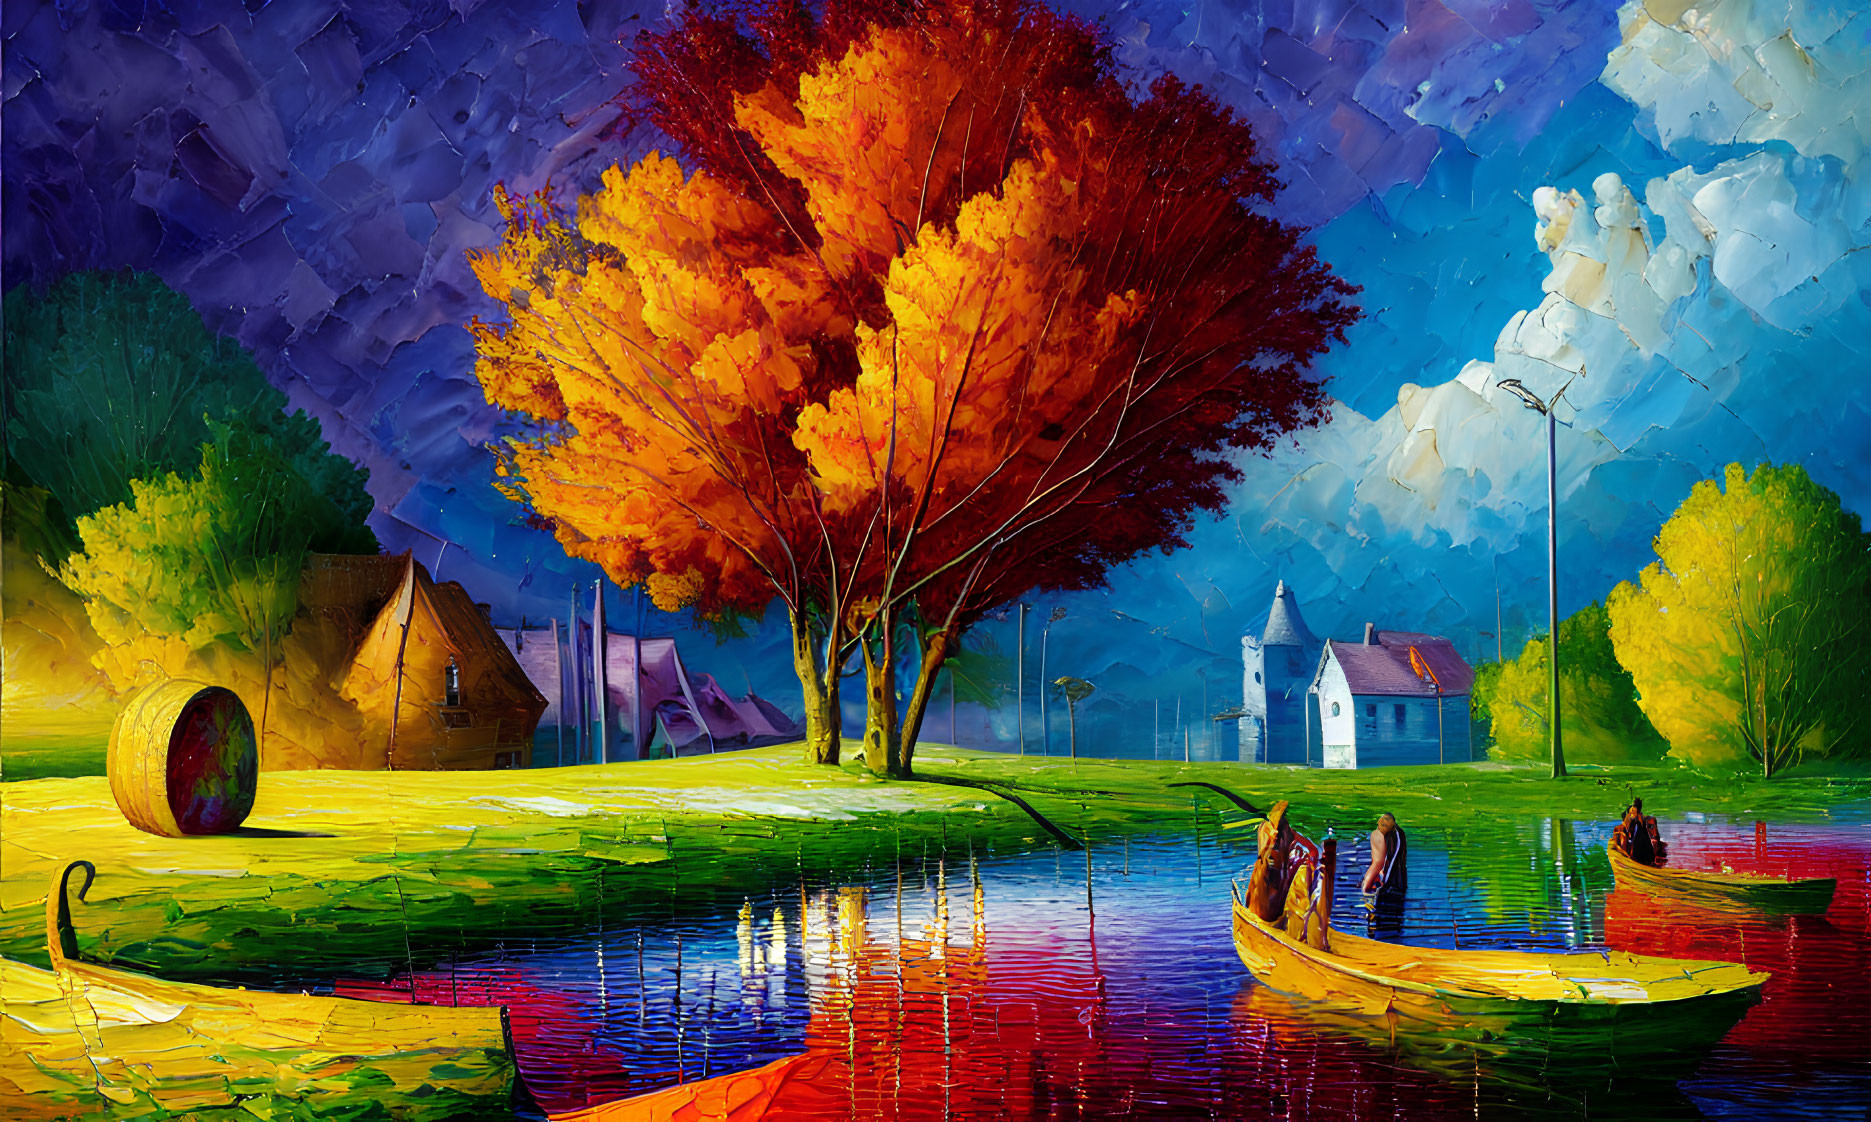 Vivid Impressionistic Painting of Autumn Tree, River, Boats, and Houses